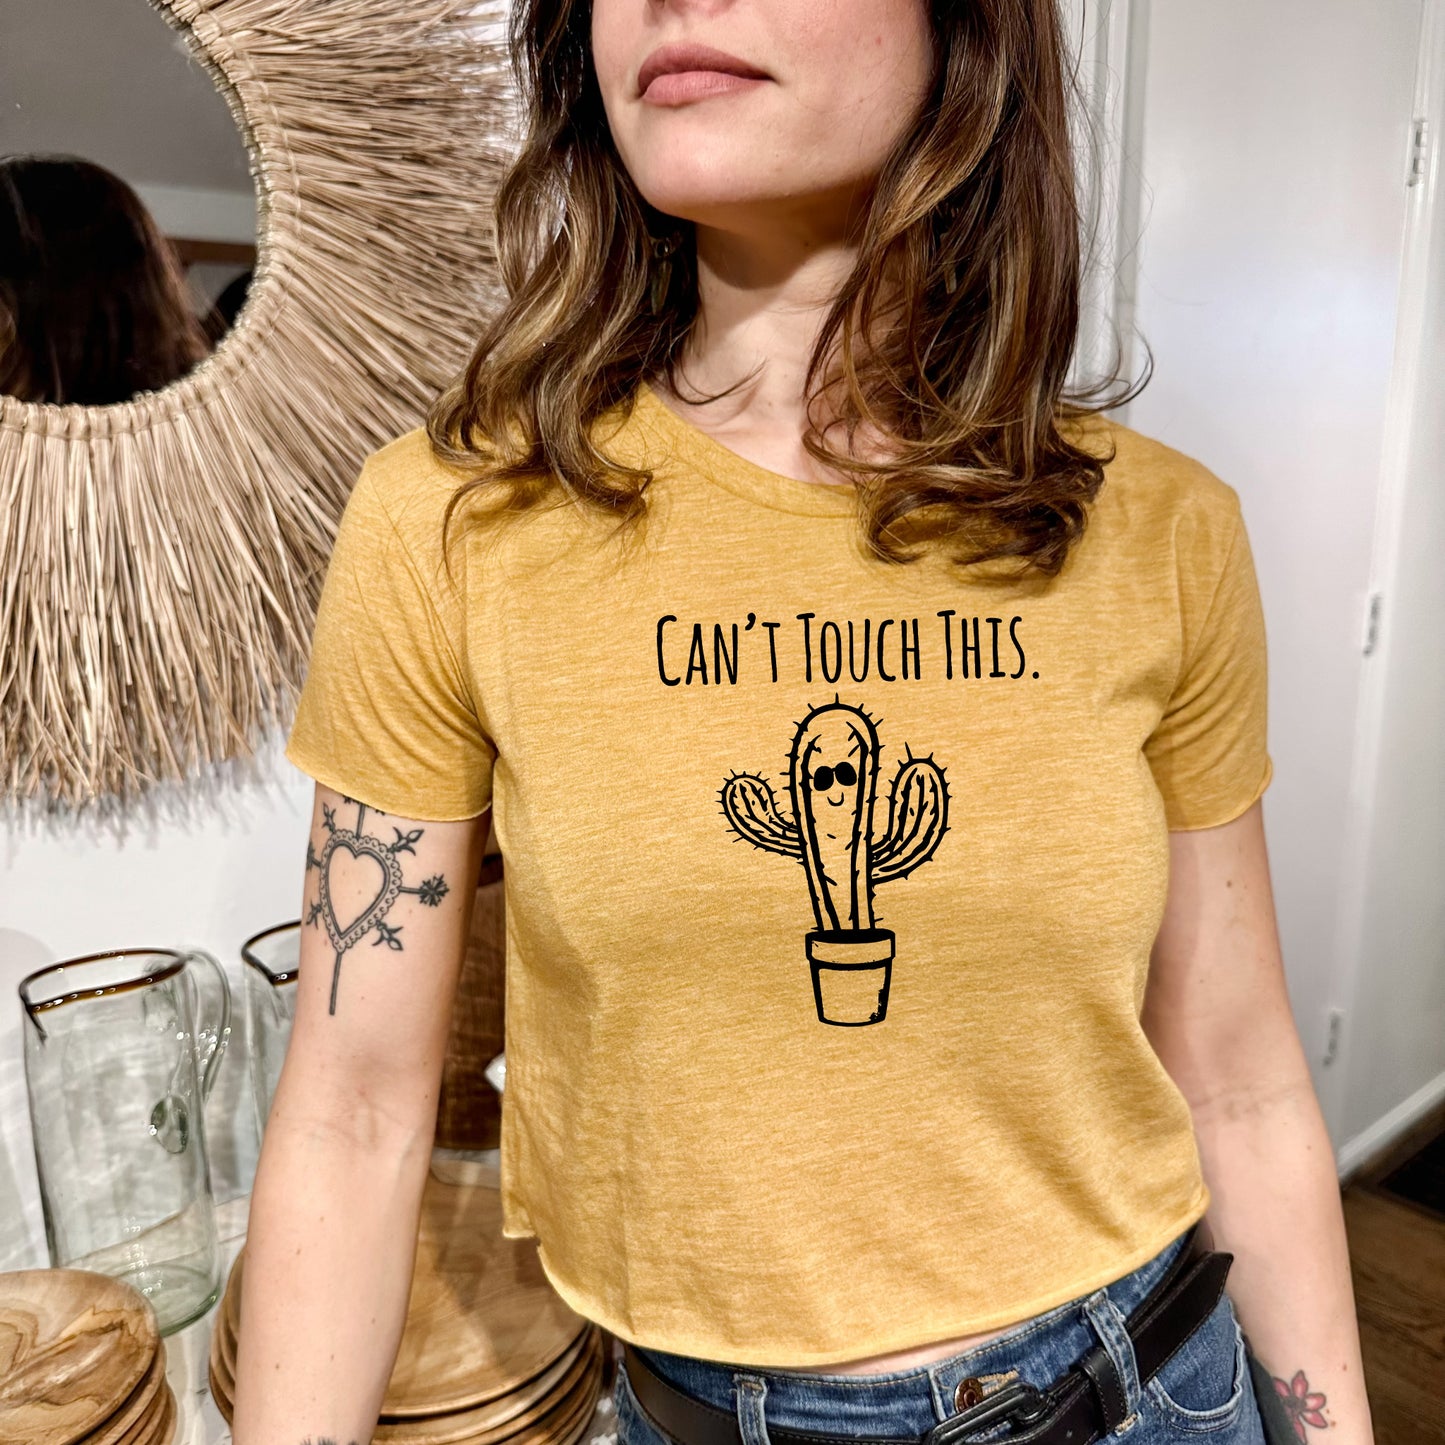 Can't Touch This (Cactus) - Women's Crop Tee - Heather Gray or Gold